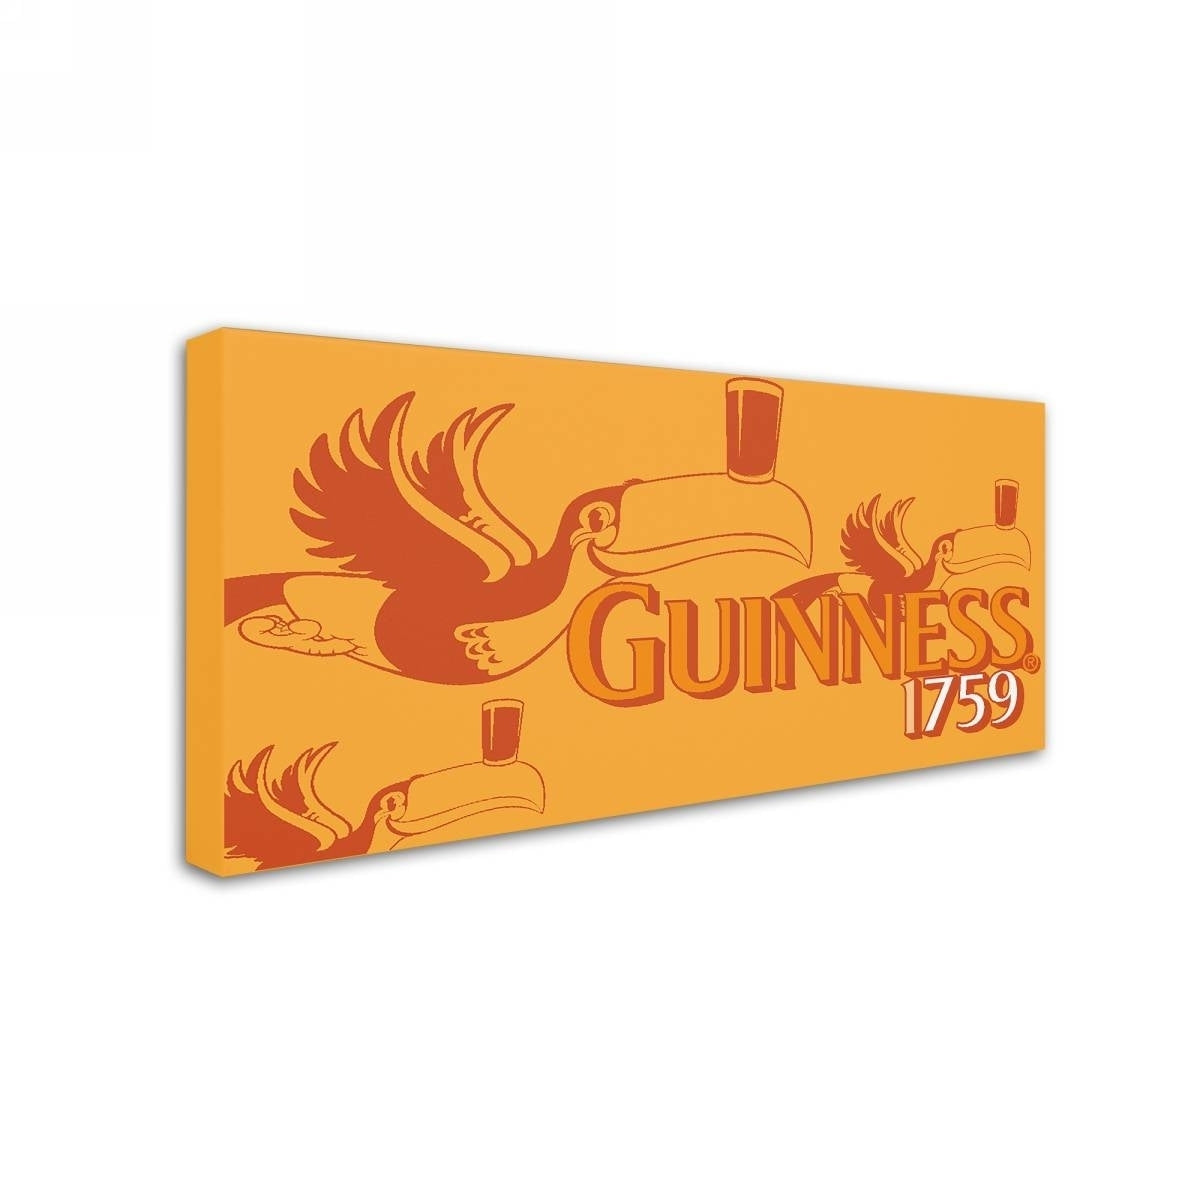 Experience the rich history and iconic brand of Guinness with our stunning Guinness Brewery 'Guinness 1759' canvas art. Celebrating their establishment in 1759, our Guinness wall art captures the essence of this legendary beer and adds a